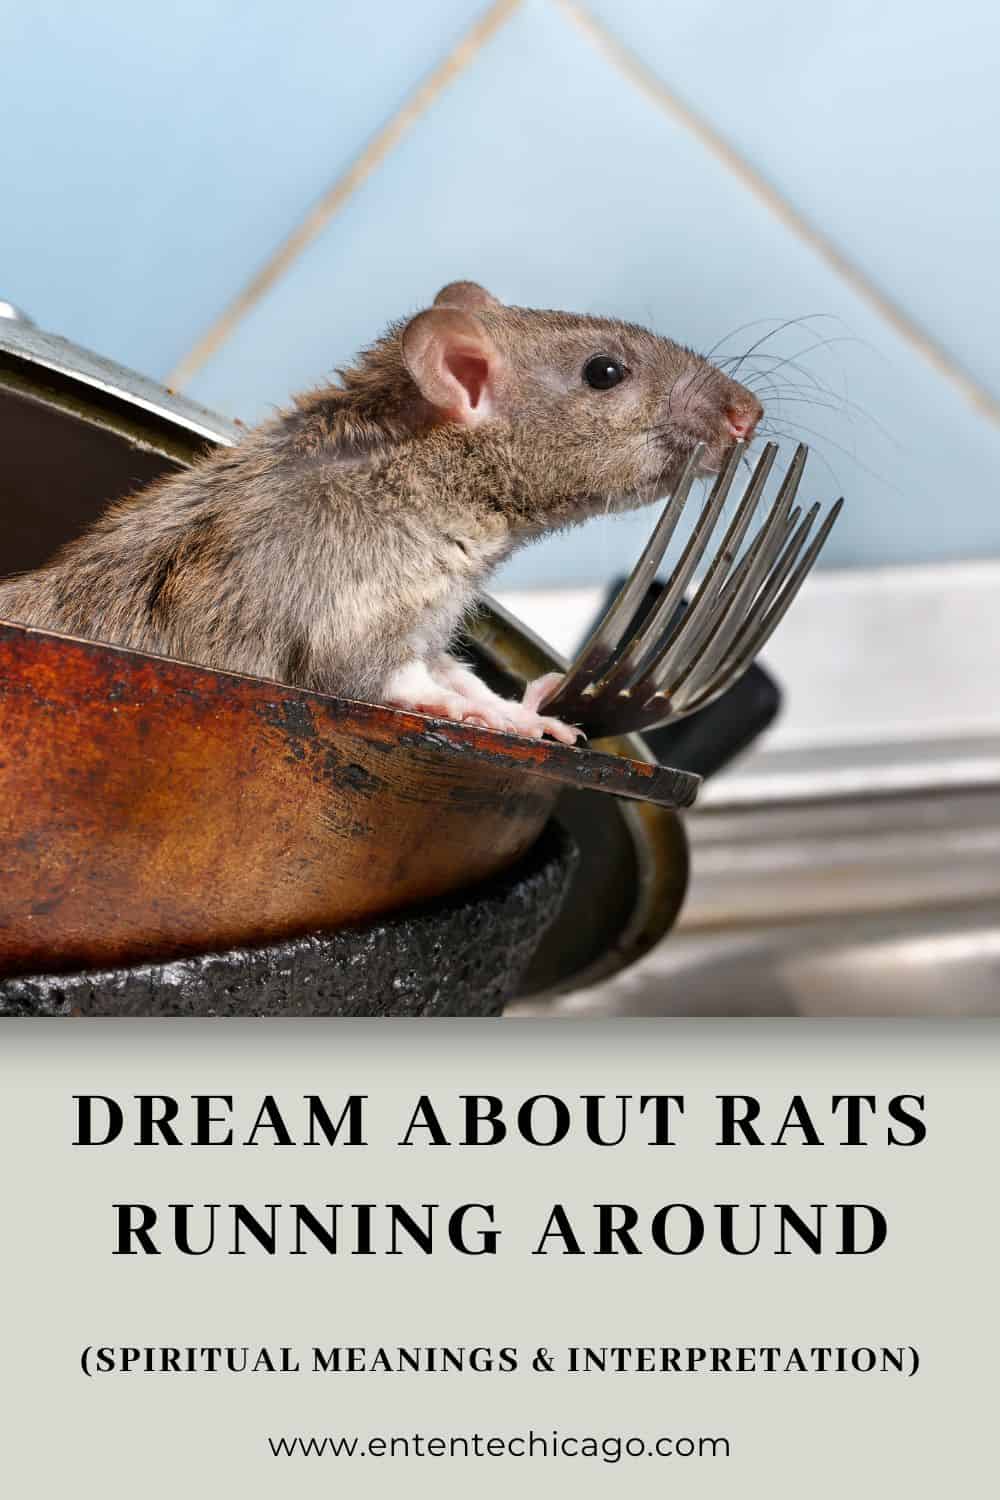 what does it mean to dream about rats running around